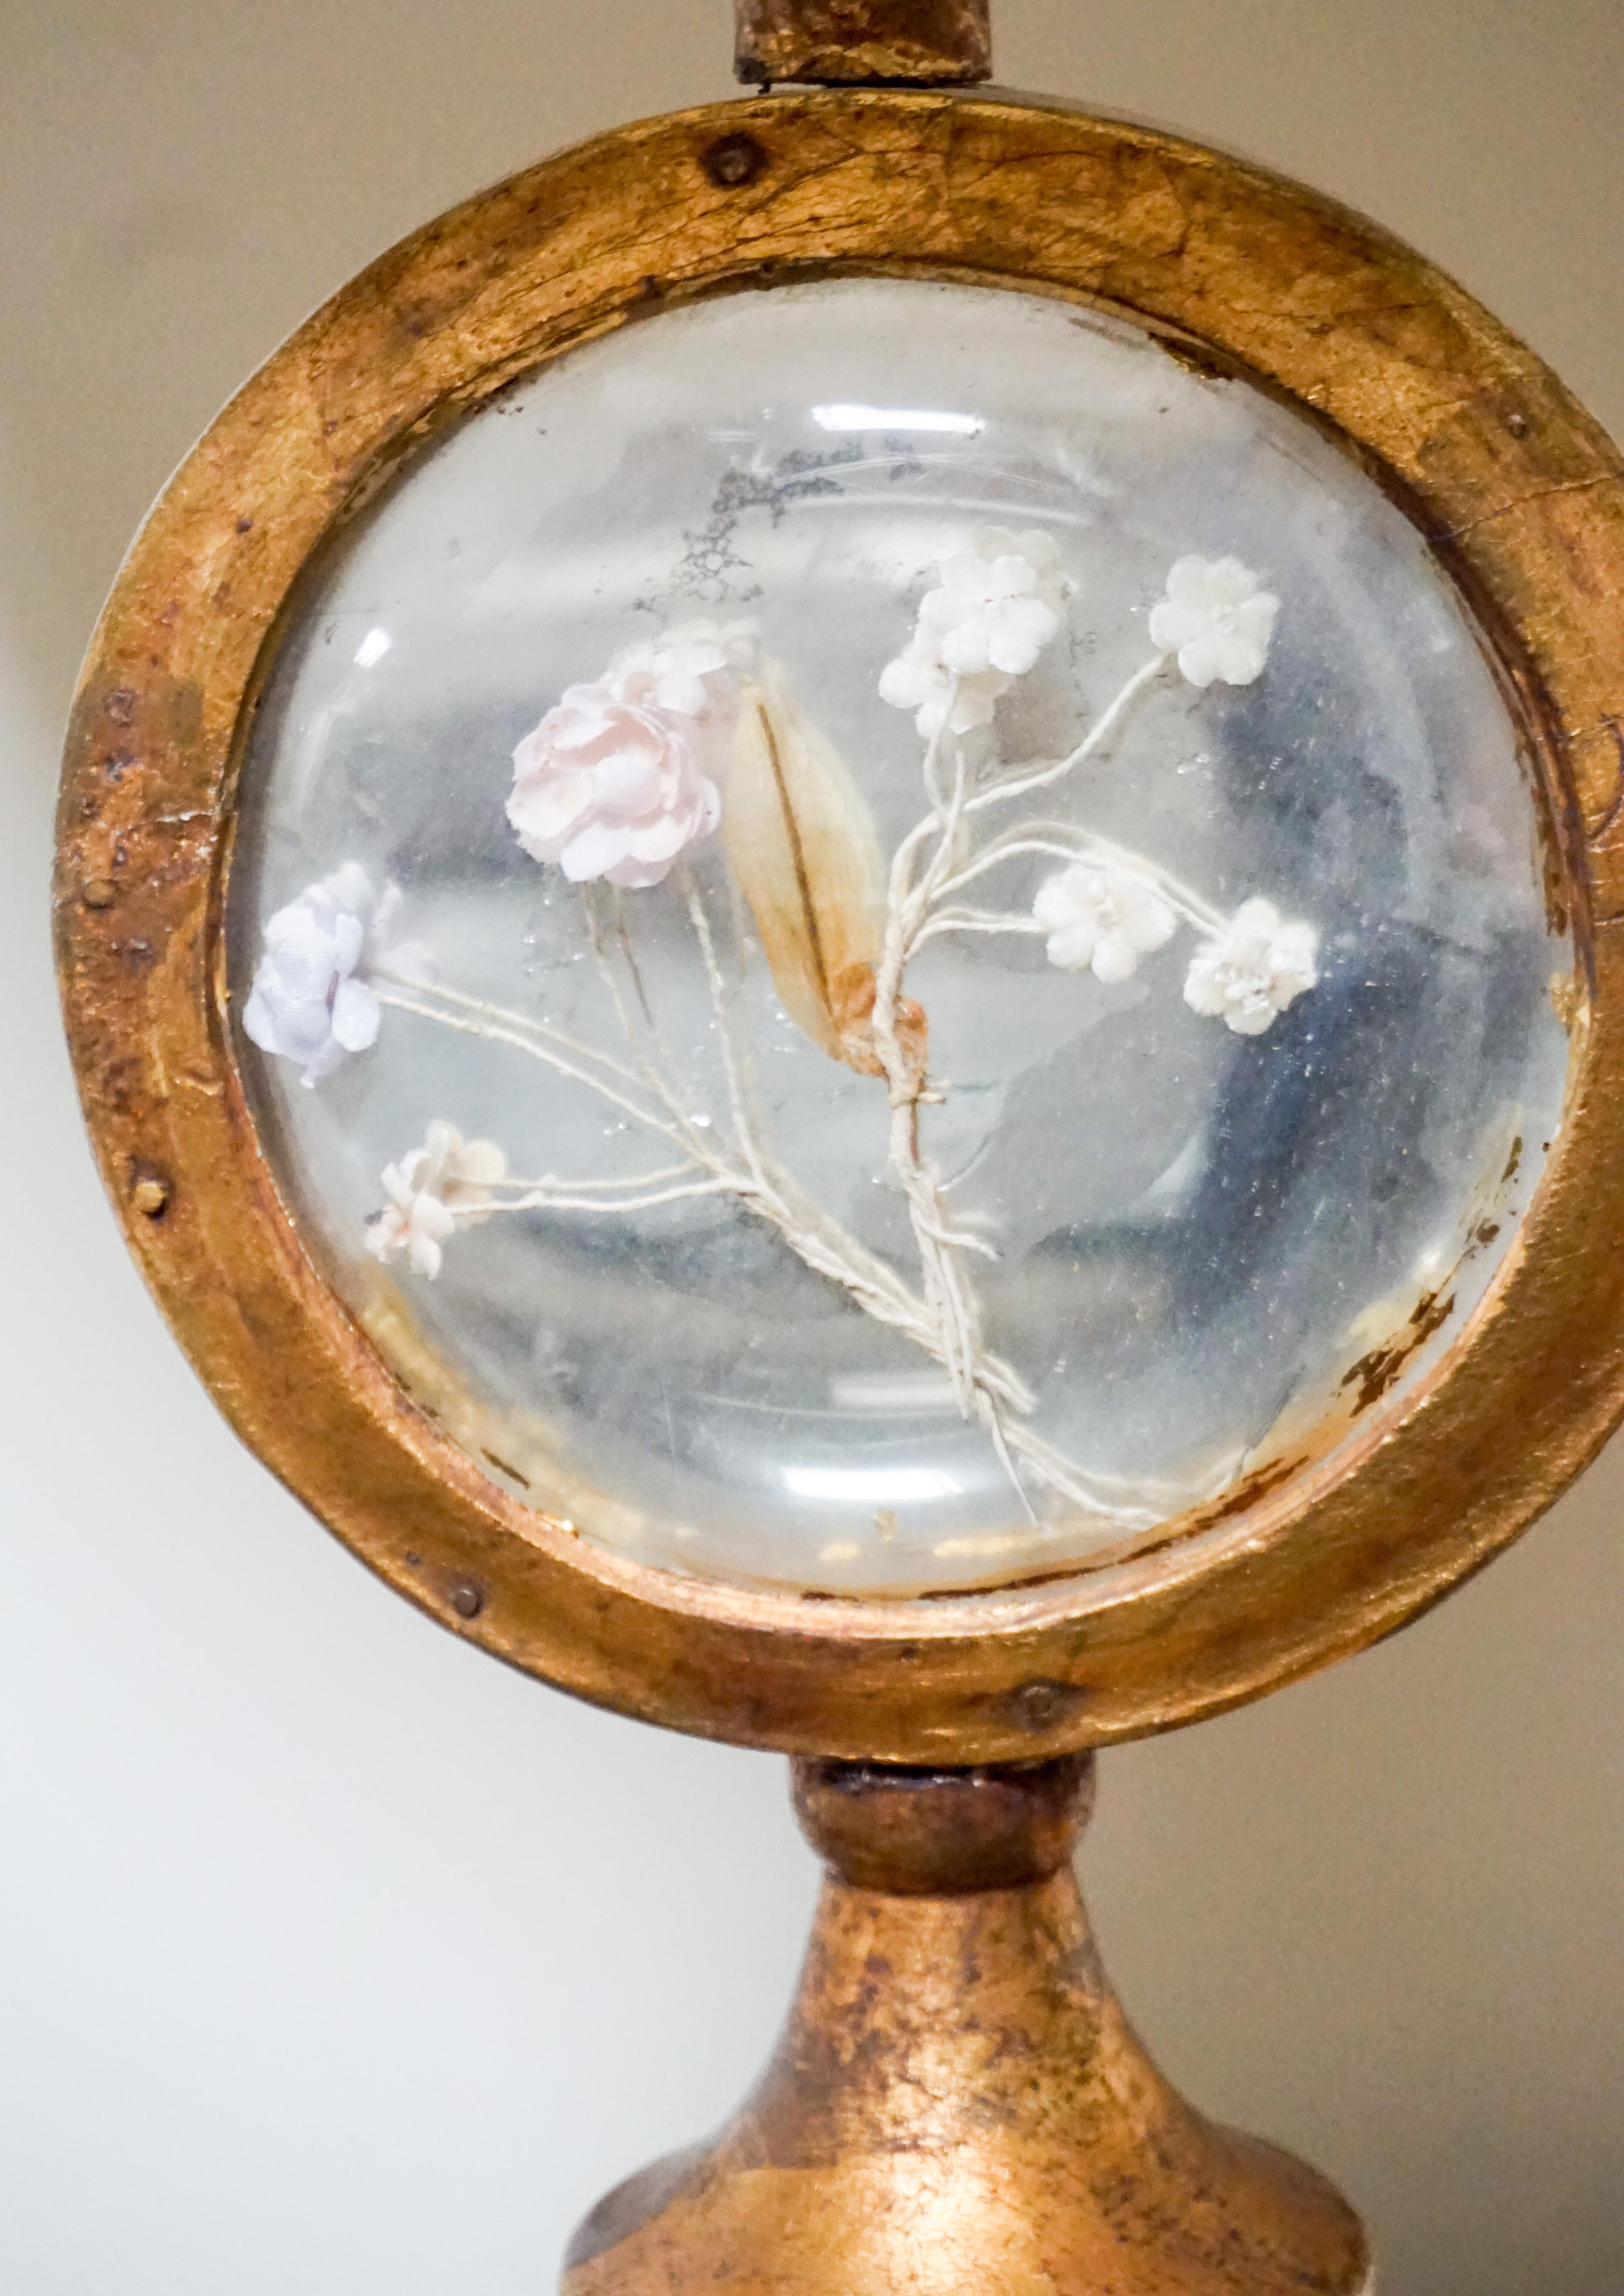 Here we have a lovely lamp from France featuring delicate flowers inside a glass dome. 

Origin: France, circa 1880.